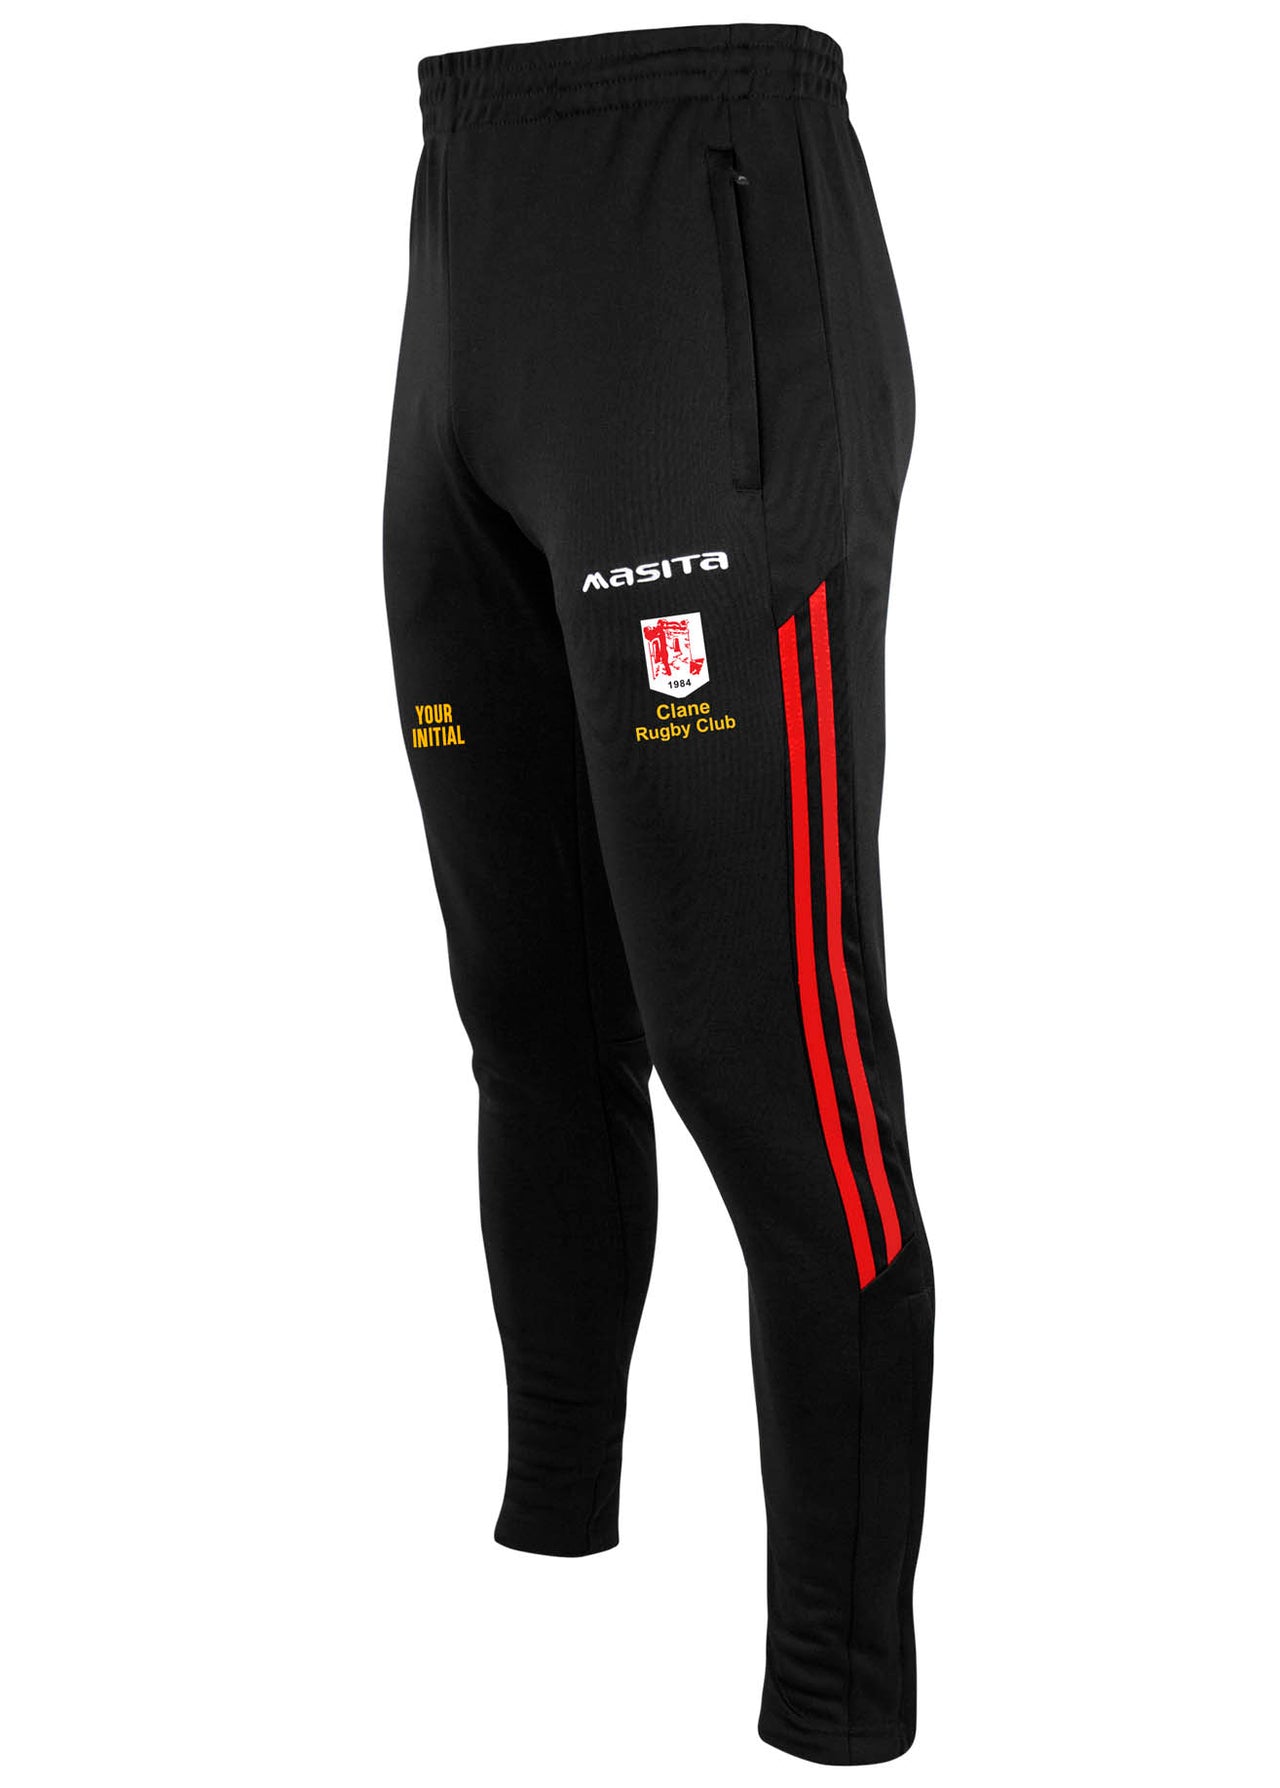 Clane Rugby Skinny Bottoms Adult